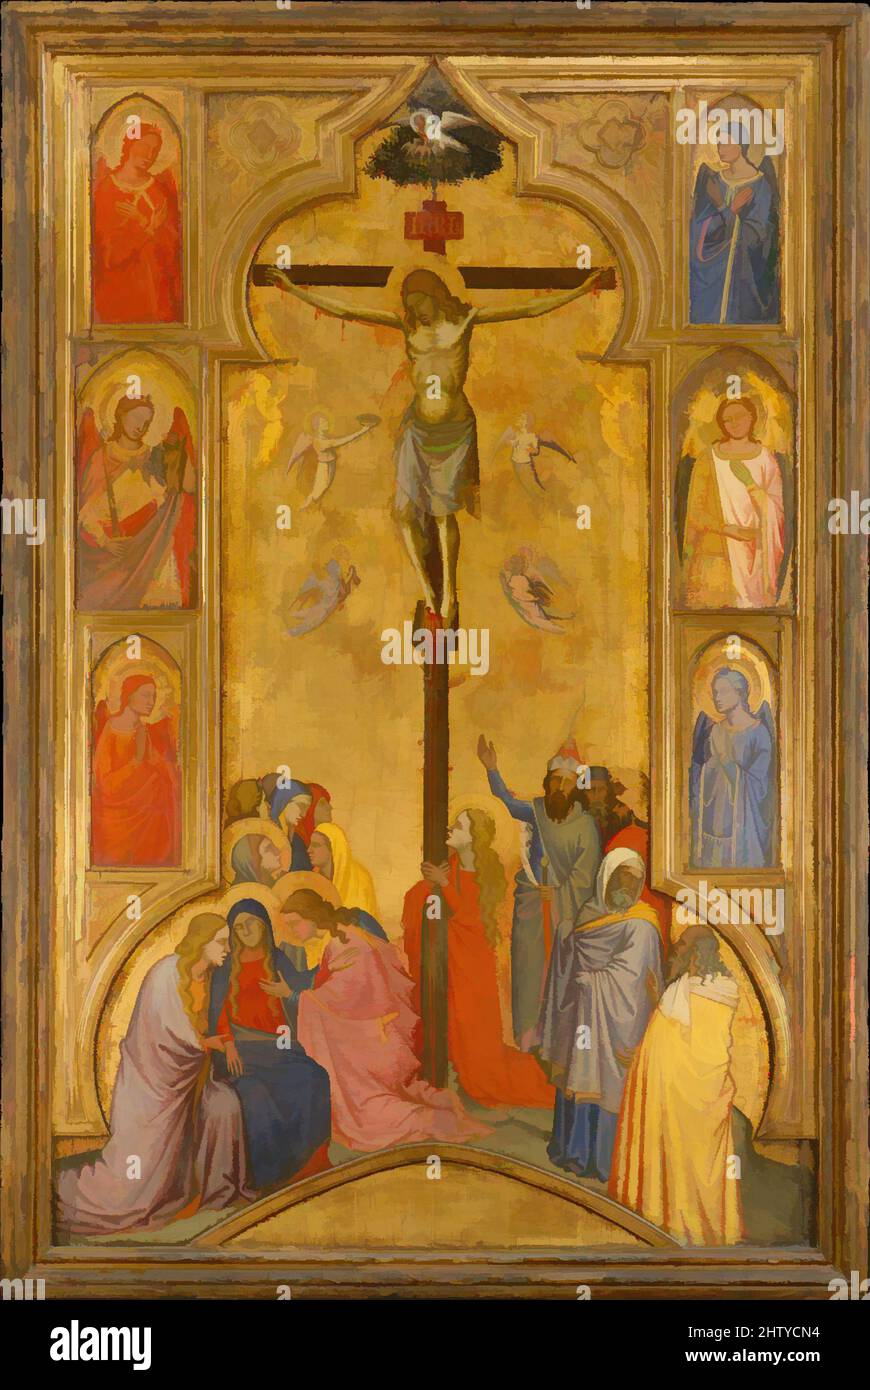 Art inspired by The Crucifixion, ca. 1365, Tempera on wood, gold ground, 54 1/8 x 32 1/4 in. (137.5 x 81.9 cm), Paintings, Andrea di Cione (Orcagna) (Italian, Florence 1315/20–1368 Florence), and workshop, The Crucifixion and the six half-length angels mounted within the frame are, Classic works modernized by Artotop with a splash of modernity. Shapes, color and value, eye-catching visual impact on art. Emotions through freedom of artworks in a contemporary way. A timeless message pursuing a wildly creative new direction. Artists turning to the digital medium and creating the Artotop NFT Stock Photo